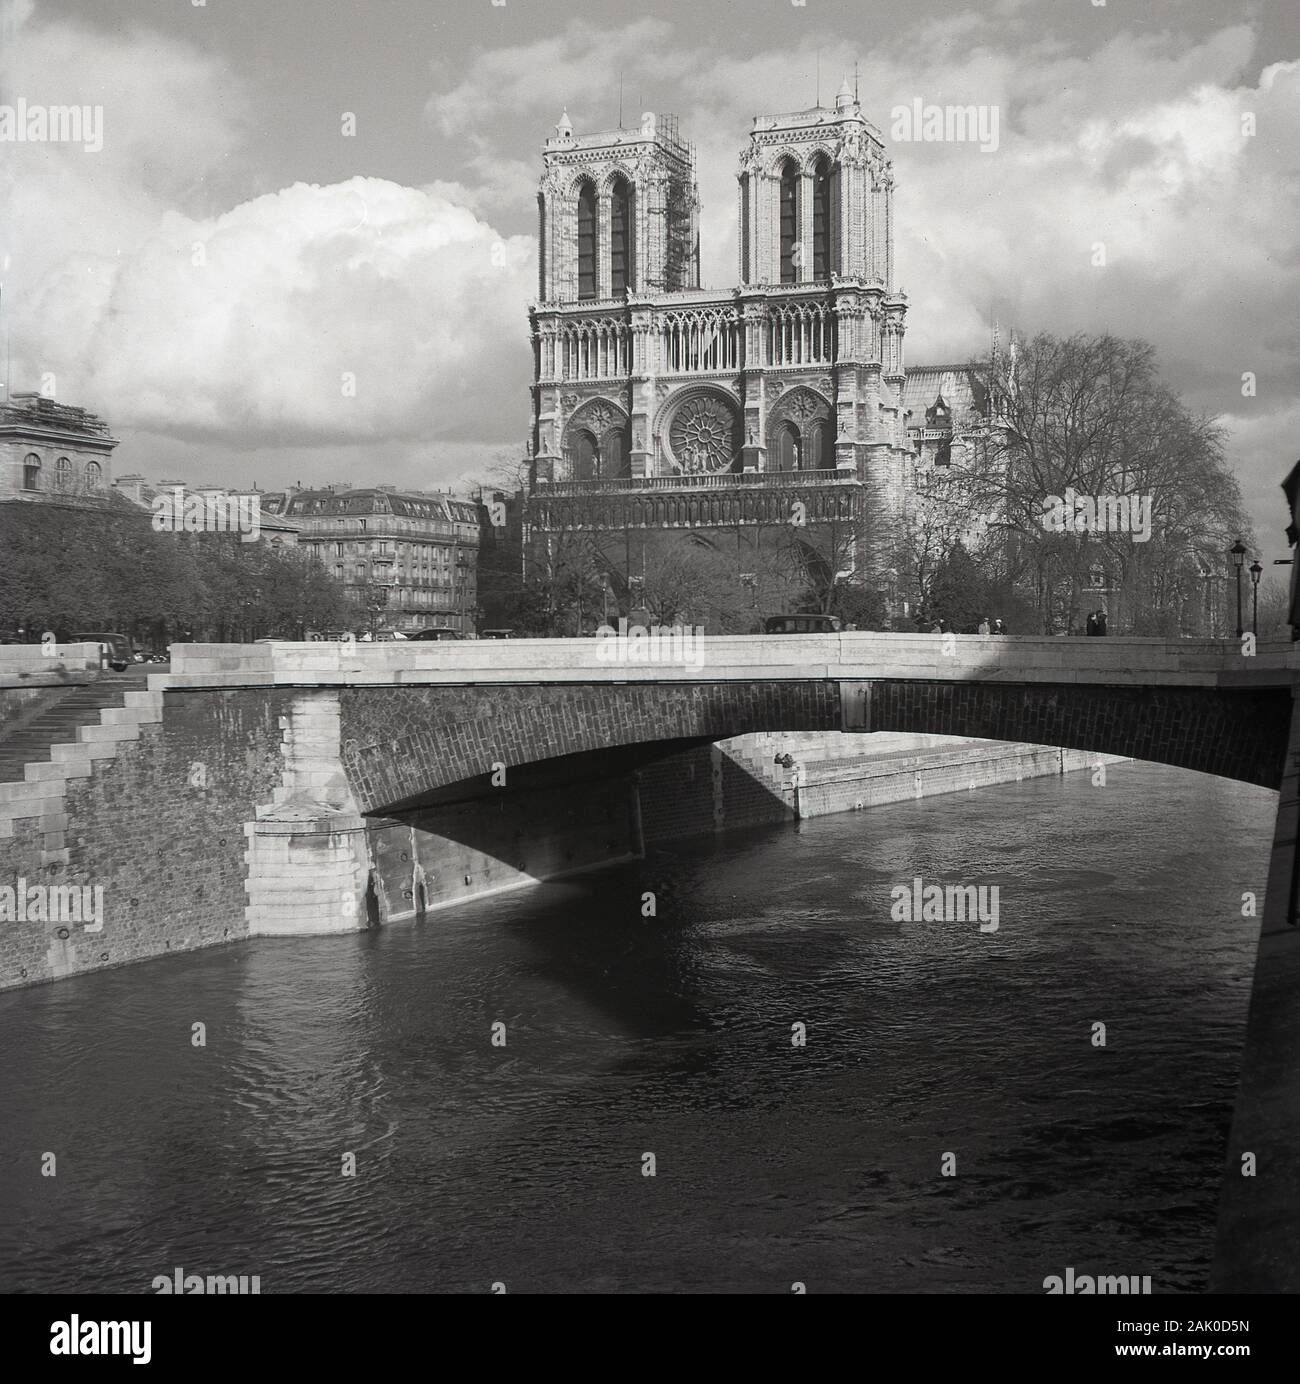 1950s, historical, a view from this era across the river Seine of the famous french landmark, the medieval Notre-Dame Cathedral, Paris, France, considered to be one of the finest examples of French Gothic architecture. Stock Photo